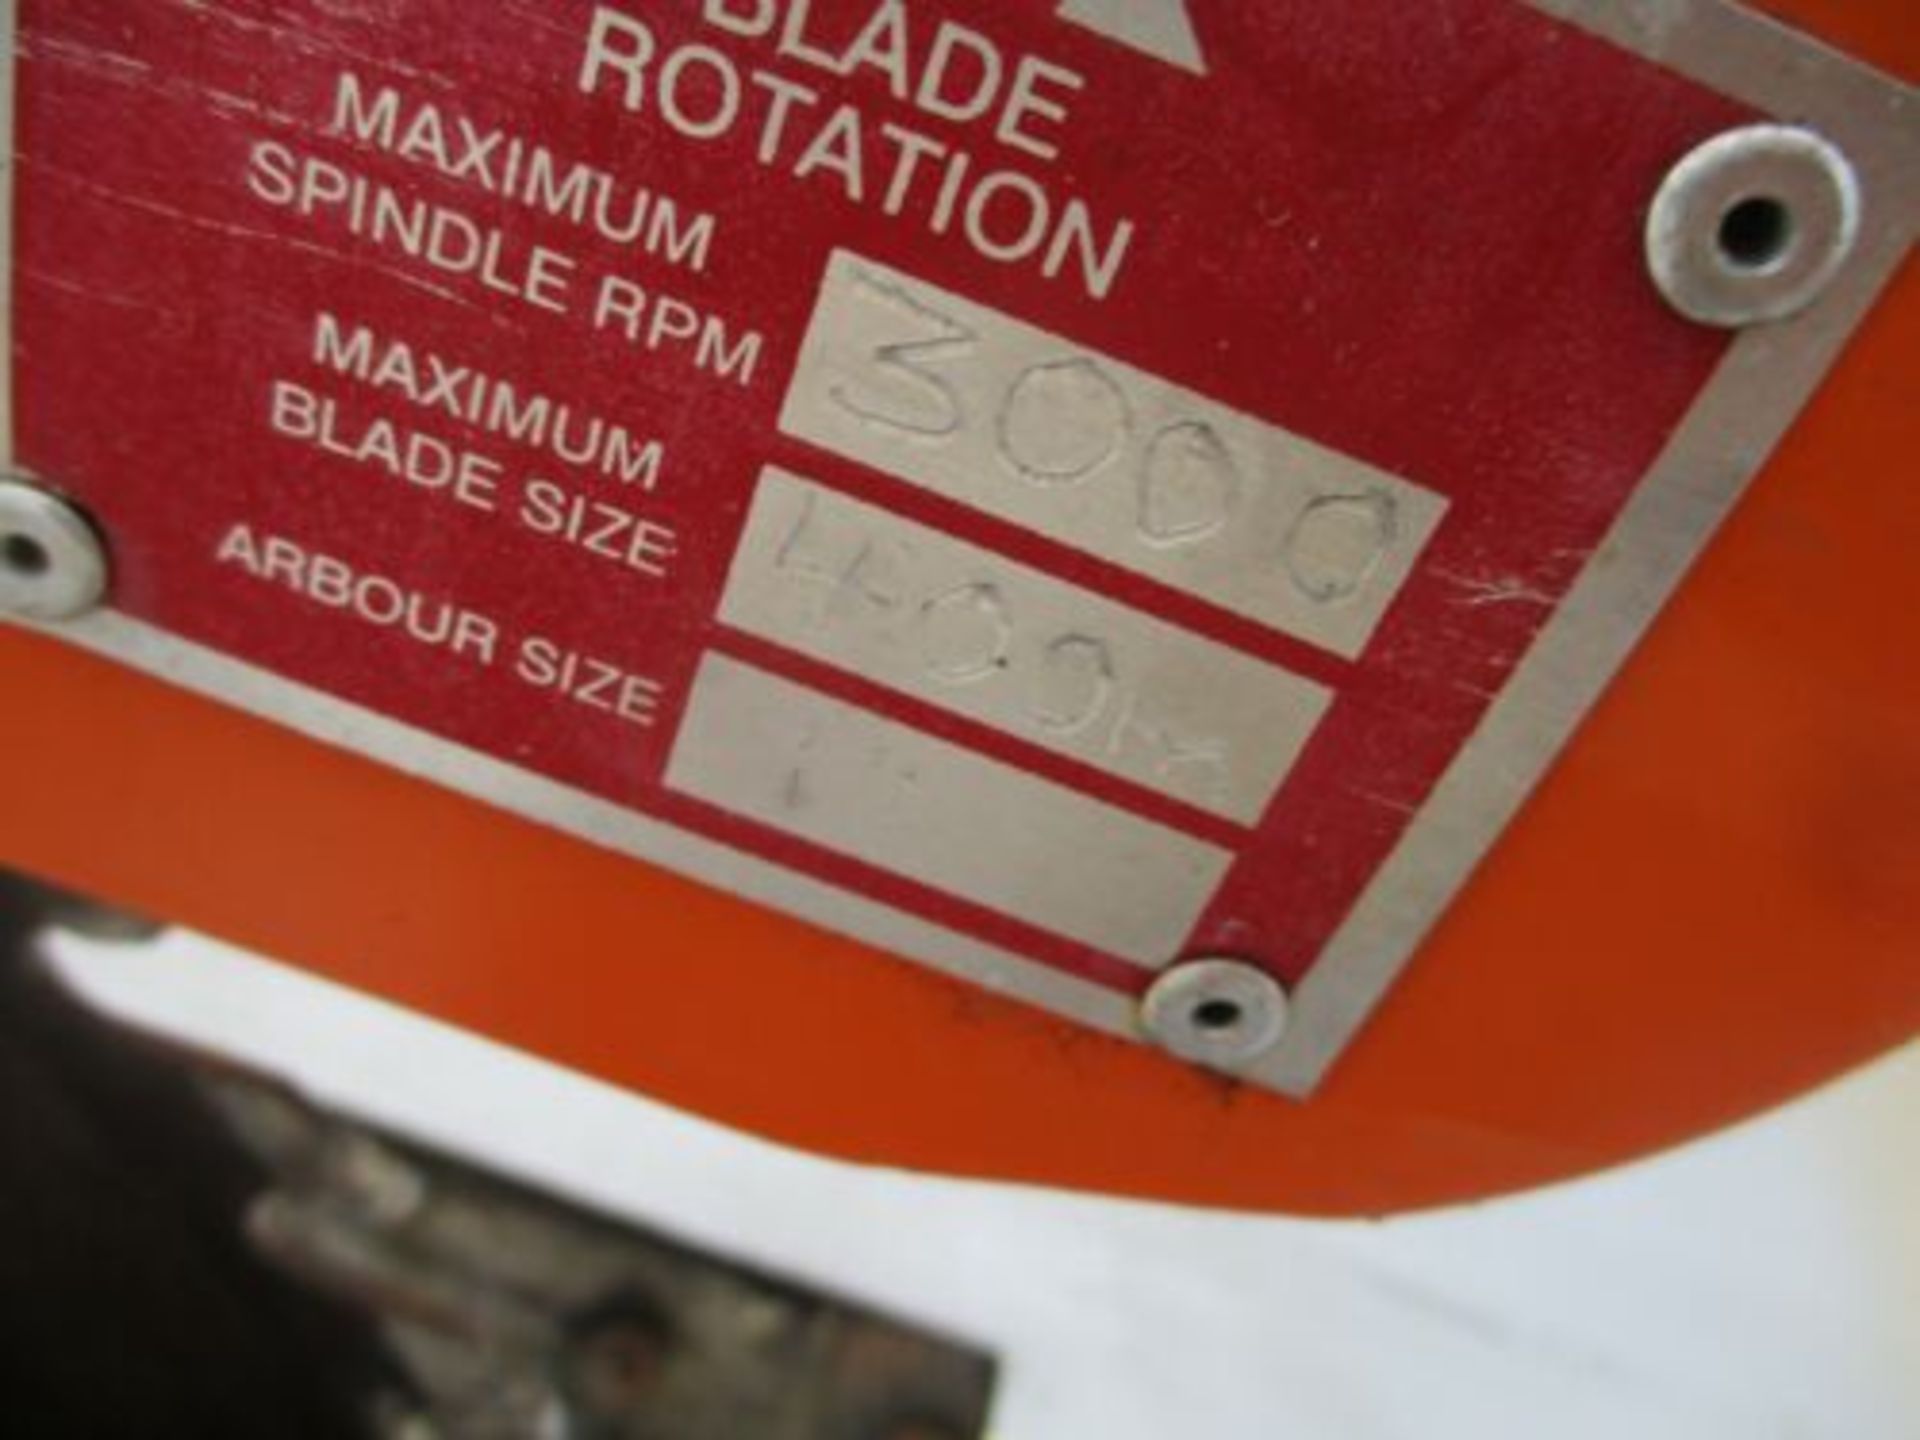 HONDA DIESEL POWER: RED BAND WSA400 SAW - Image 6 of 6